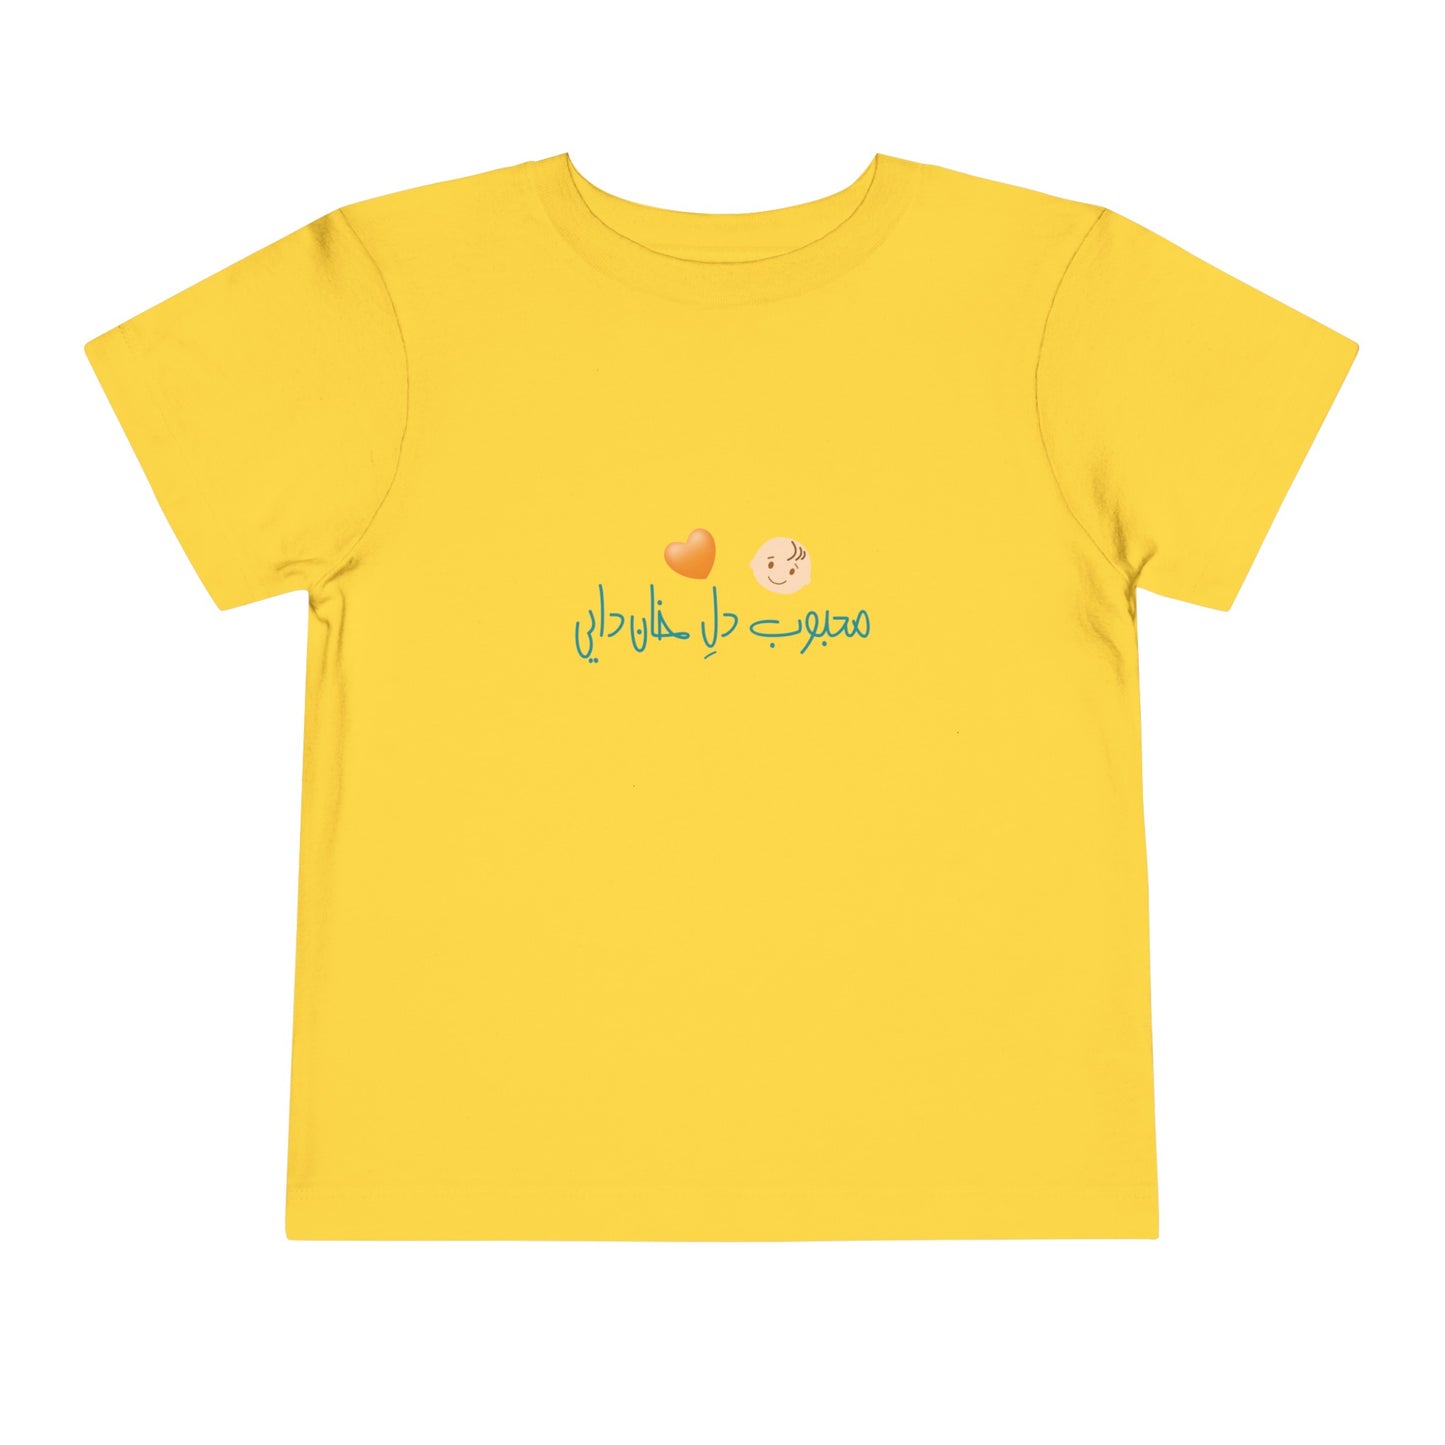 Toddler Short Sleeve Tee "My Uncle Loves Me"/محبوب دل خان دایی